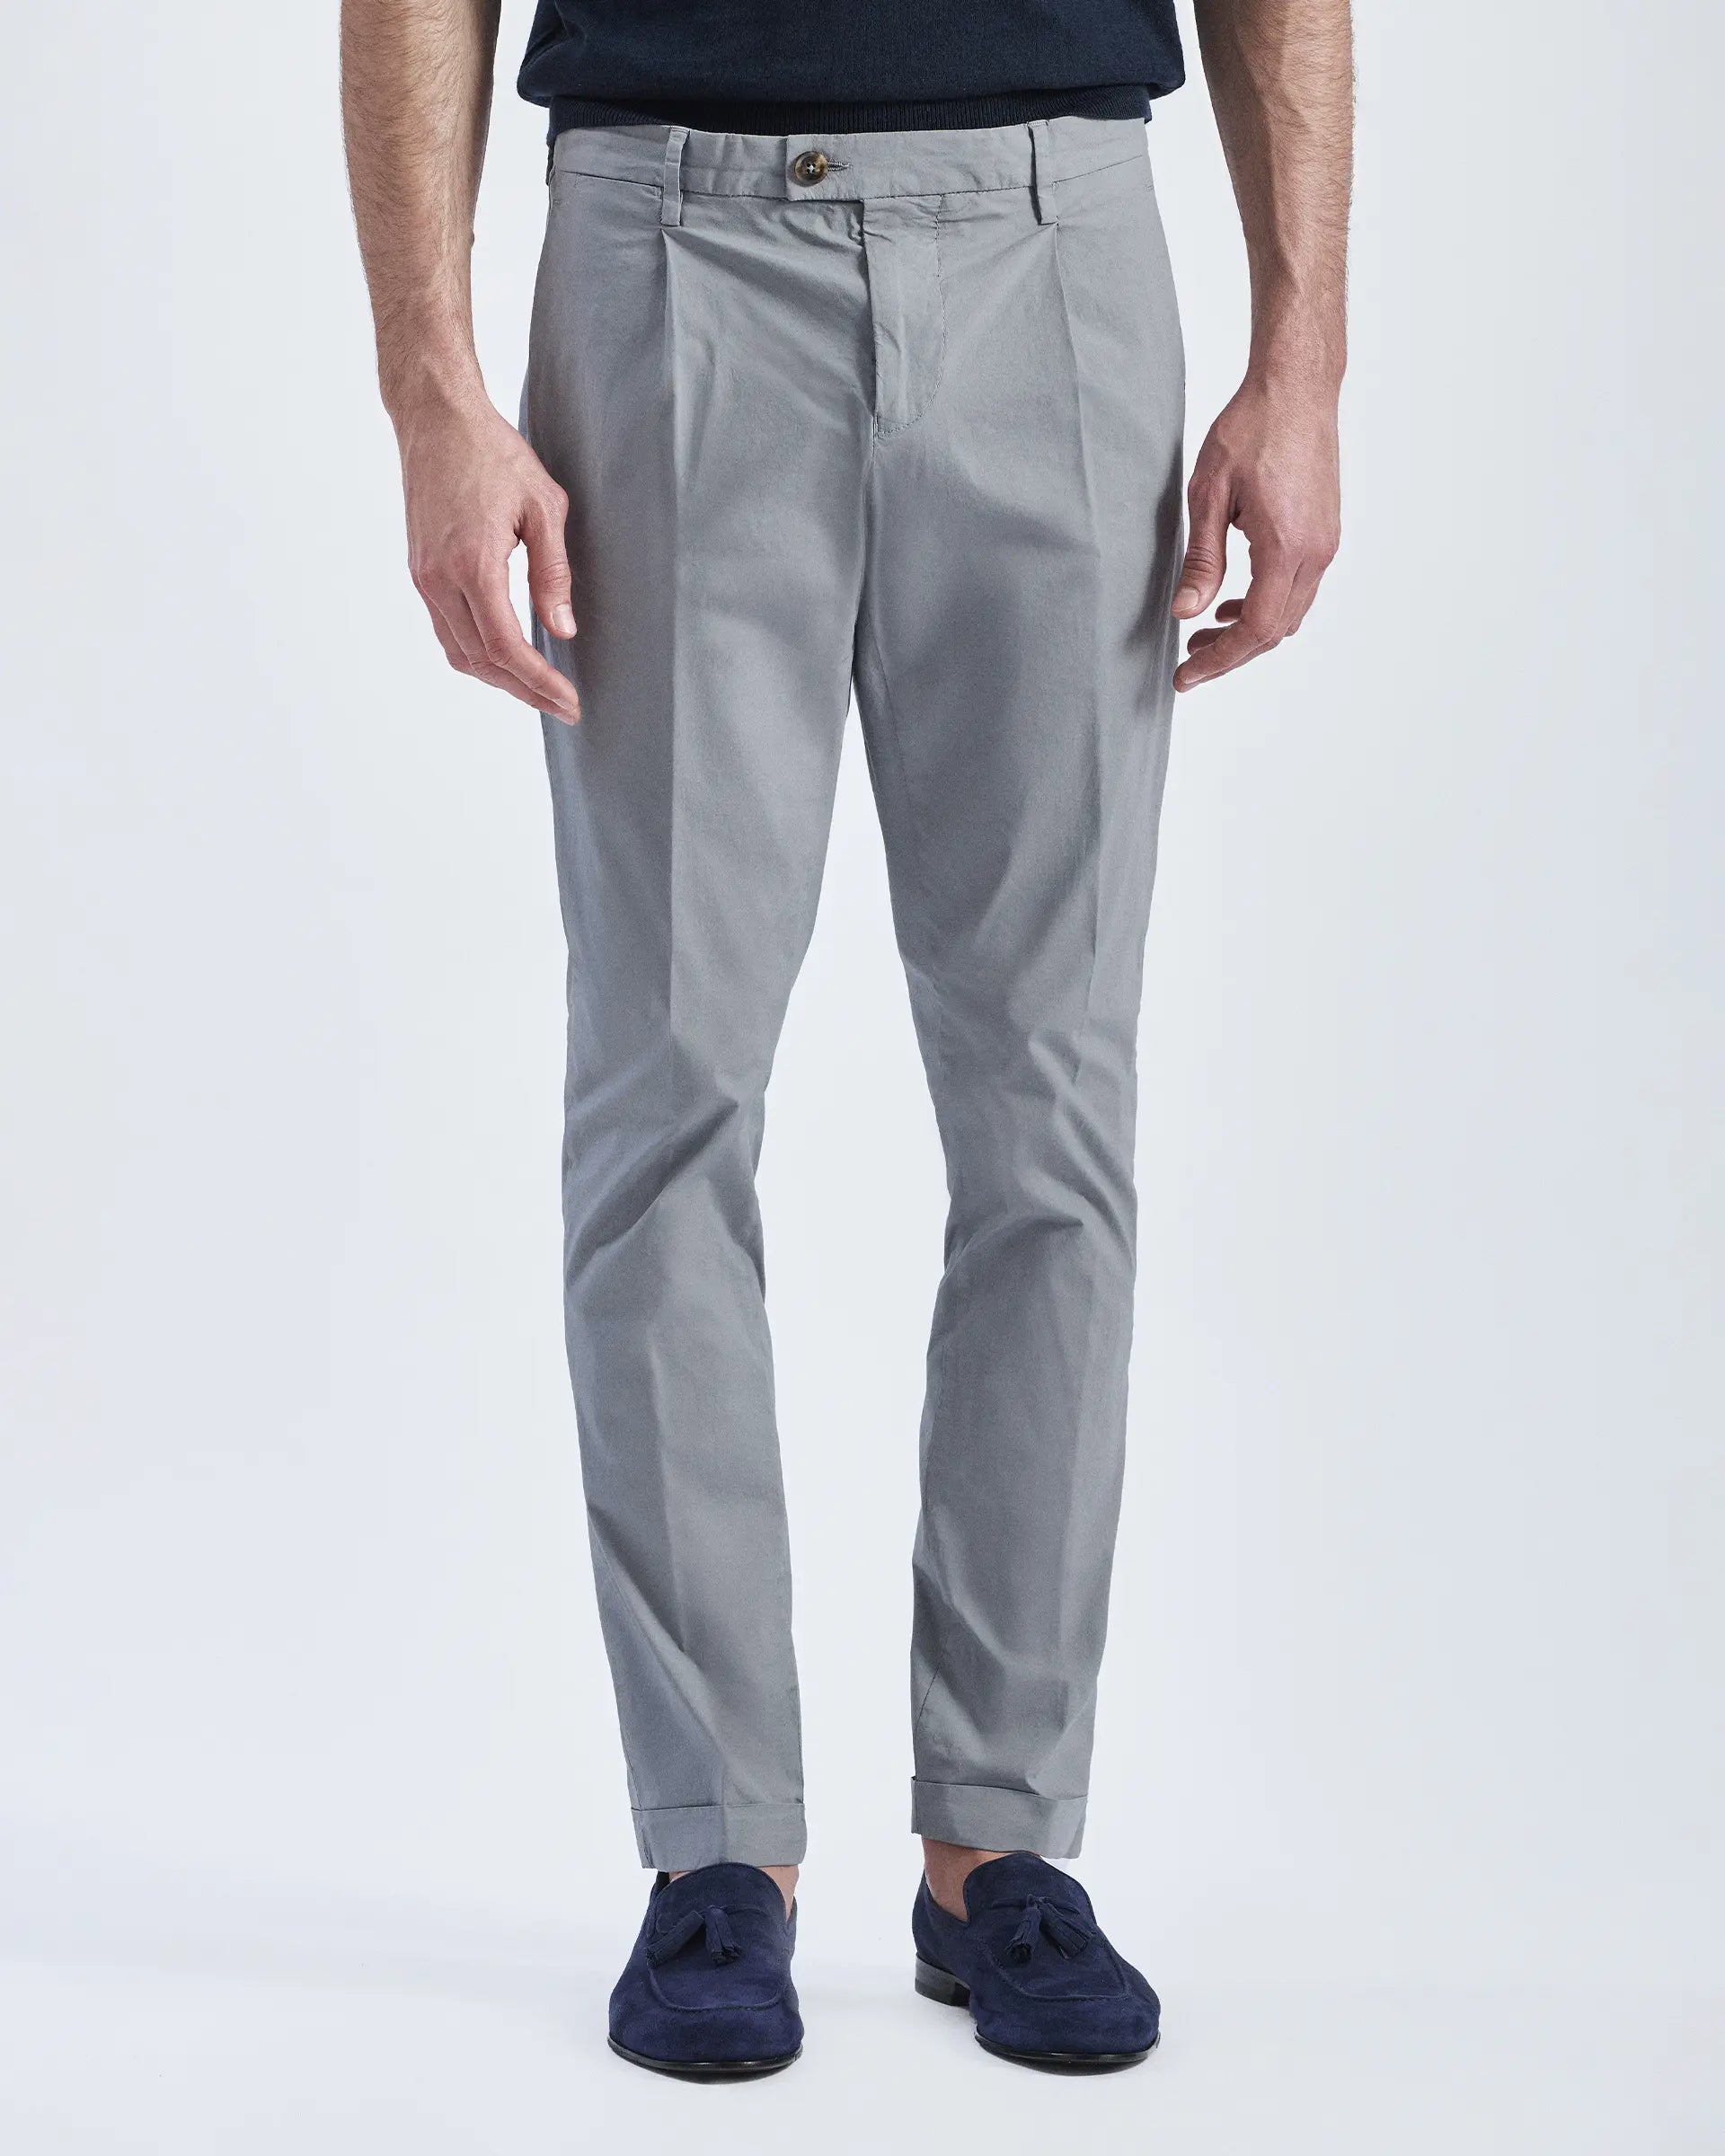 Grey Cotton Stretch Pleated Pants